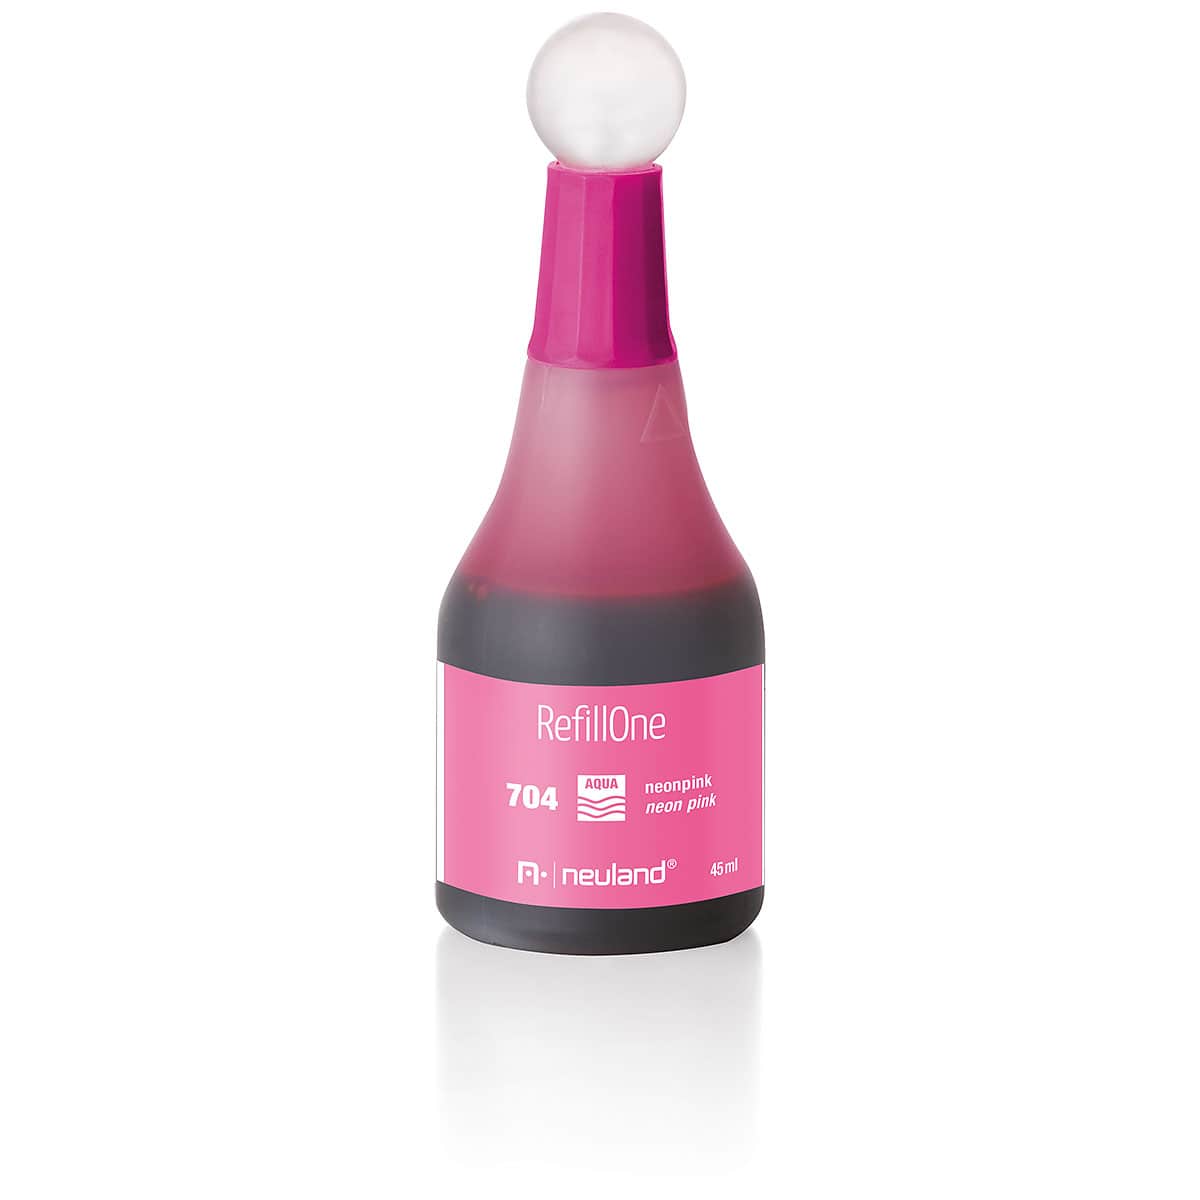 Neuland Ink RefillOne, Single Colors- 704 neonpink